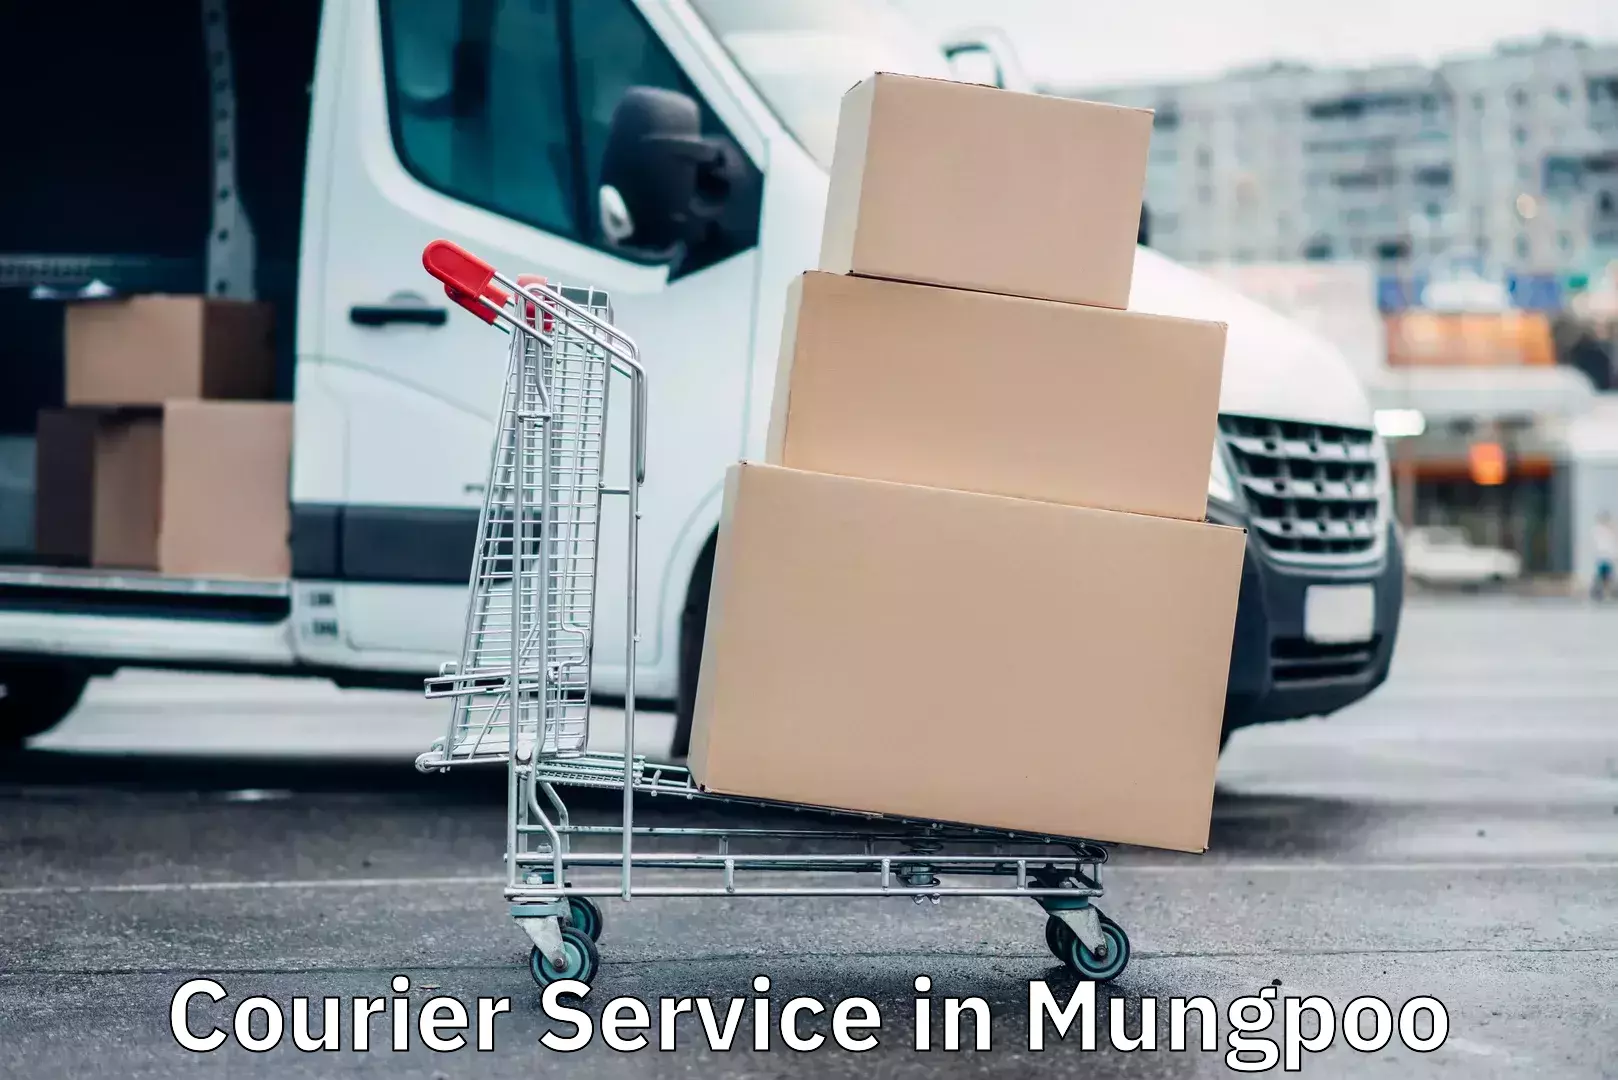 Secure package delivery in Mungpoo